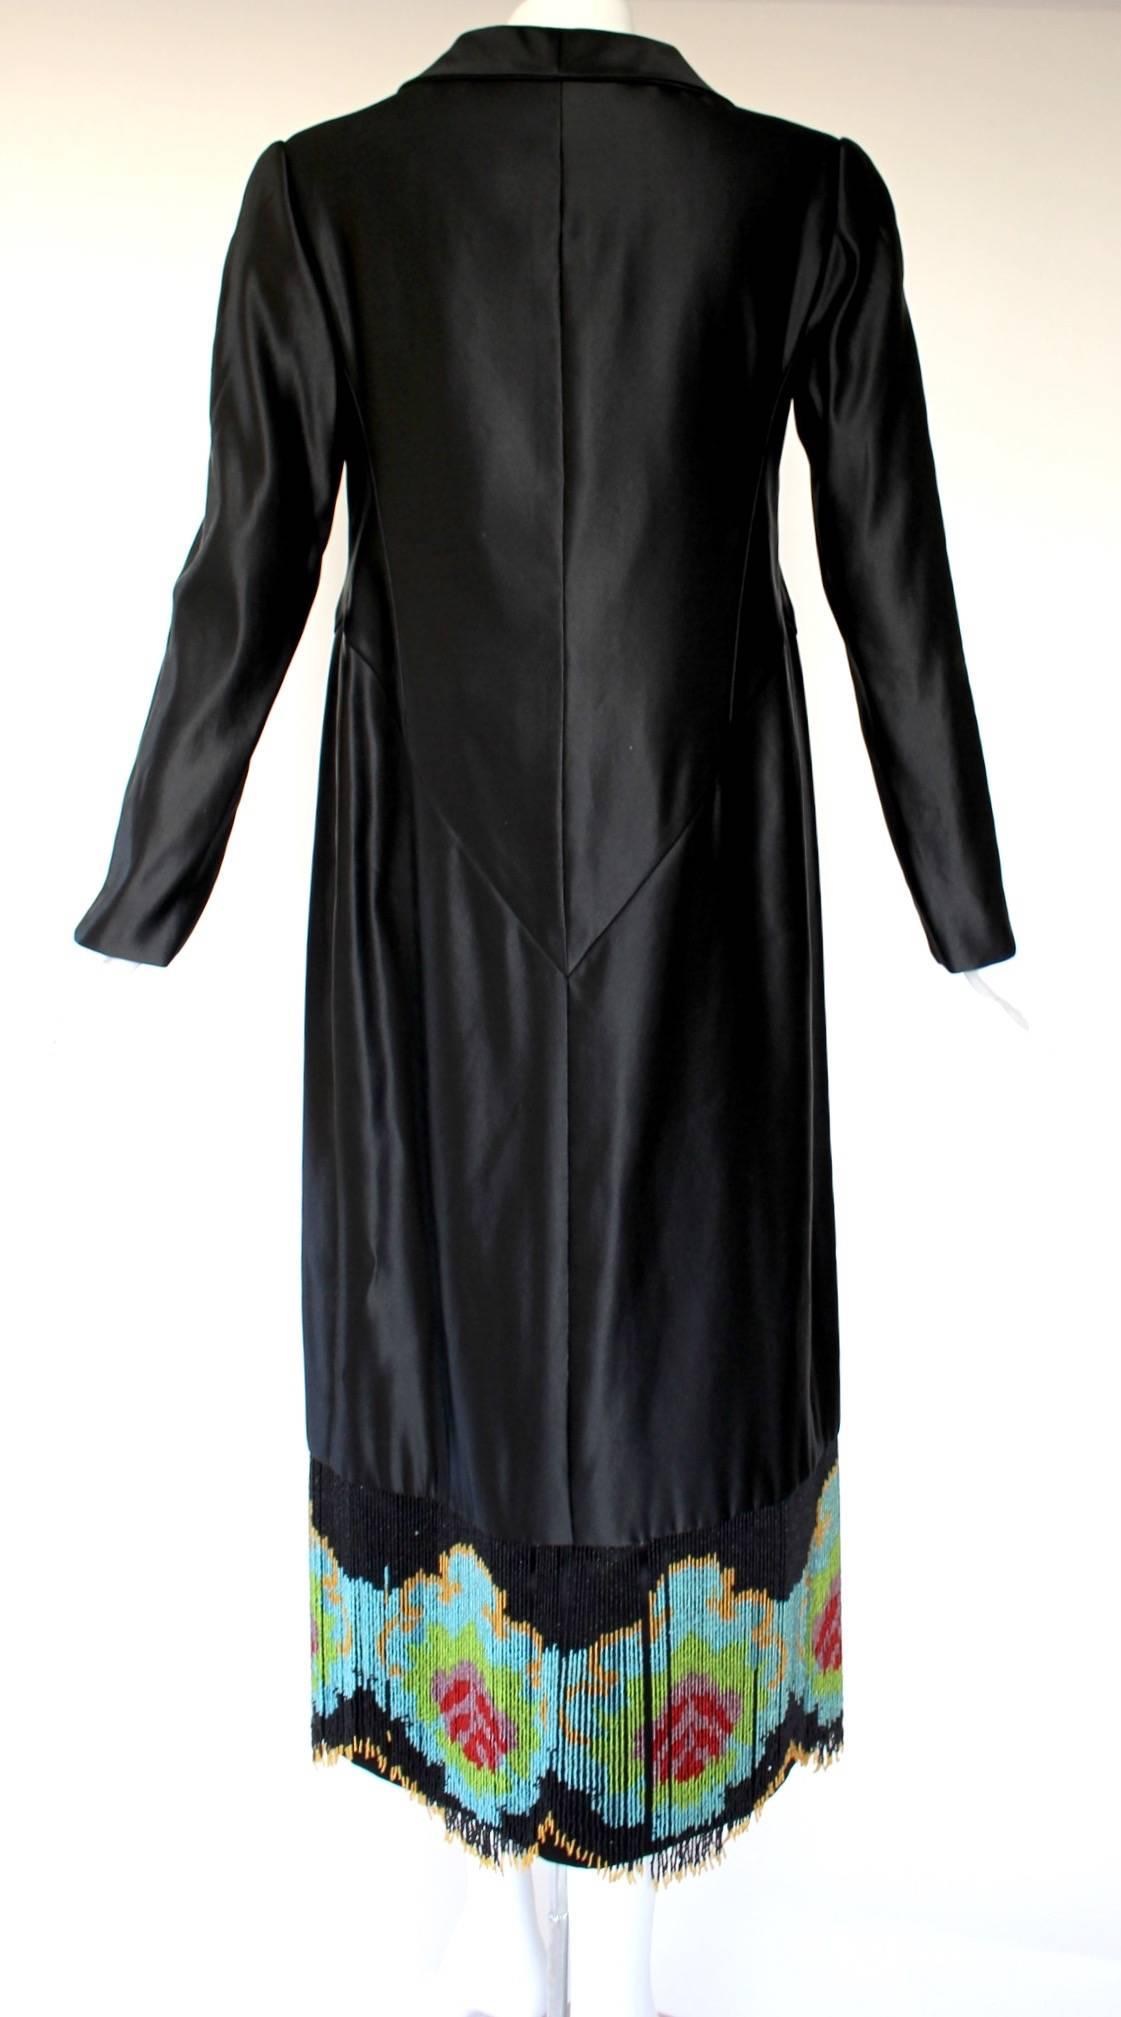 Women's Custom Couture Black Silk Evening Dress Coat with Antique French Beaded Trim 